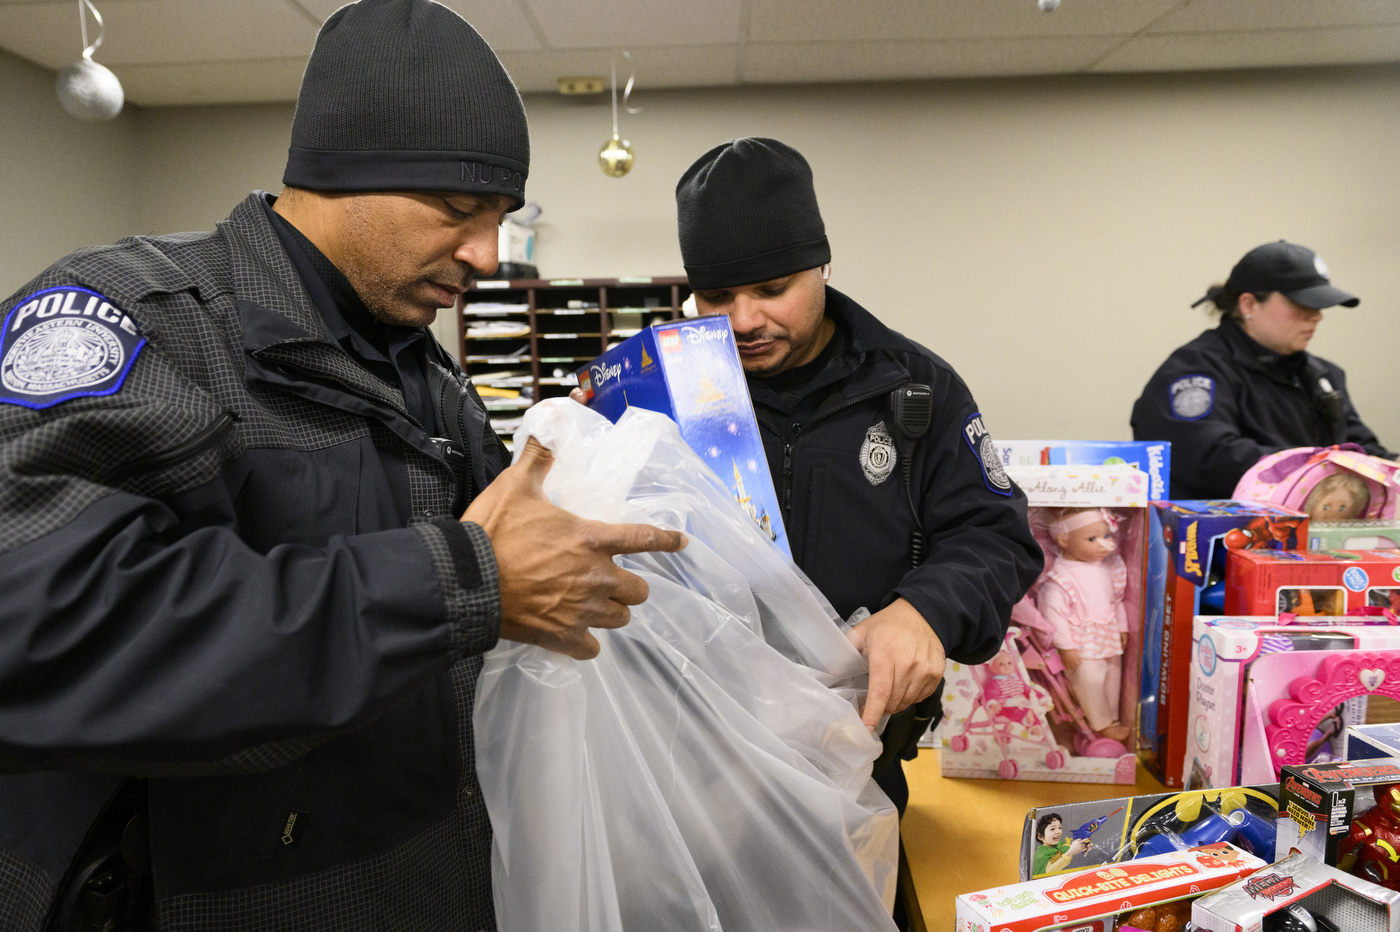 police officer sorting toys into garbage bags